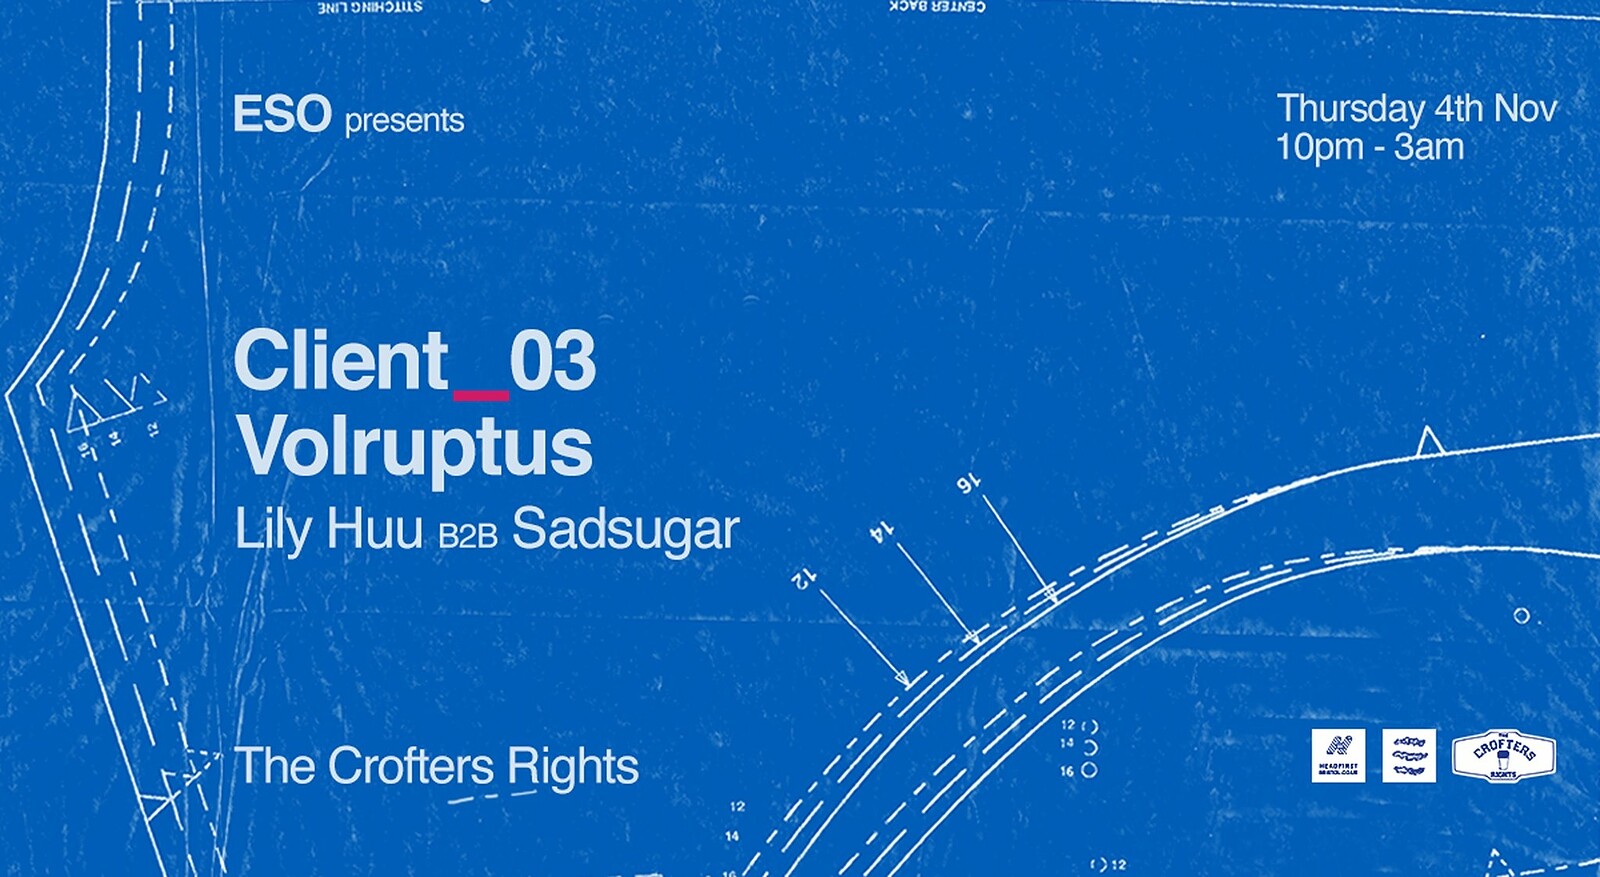 ESO Pres. Client_03, Volruptus + Support at Crofters Rights